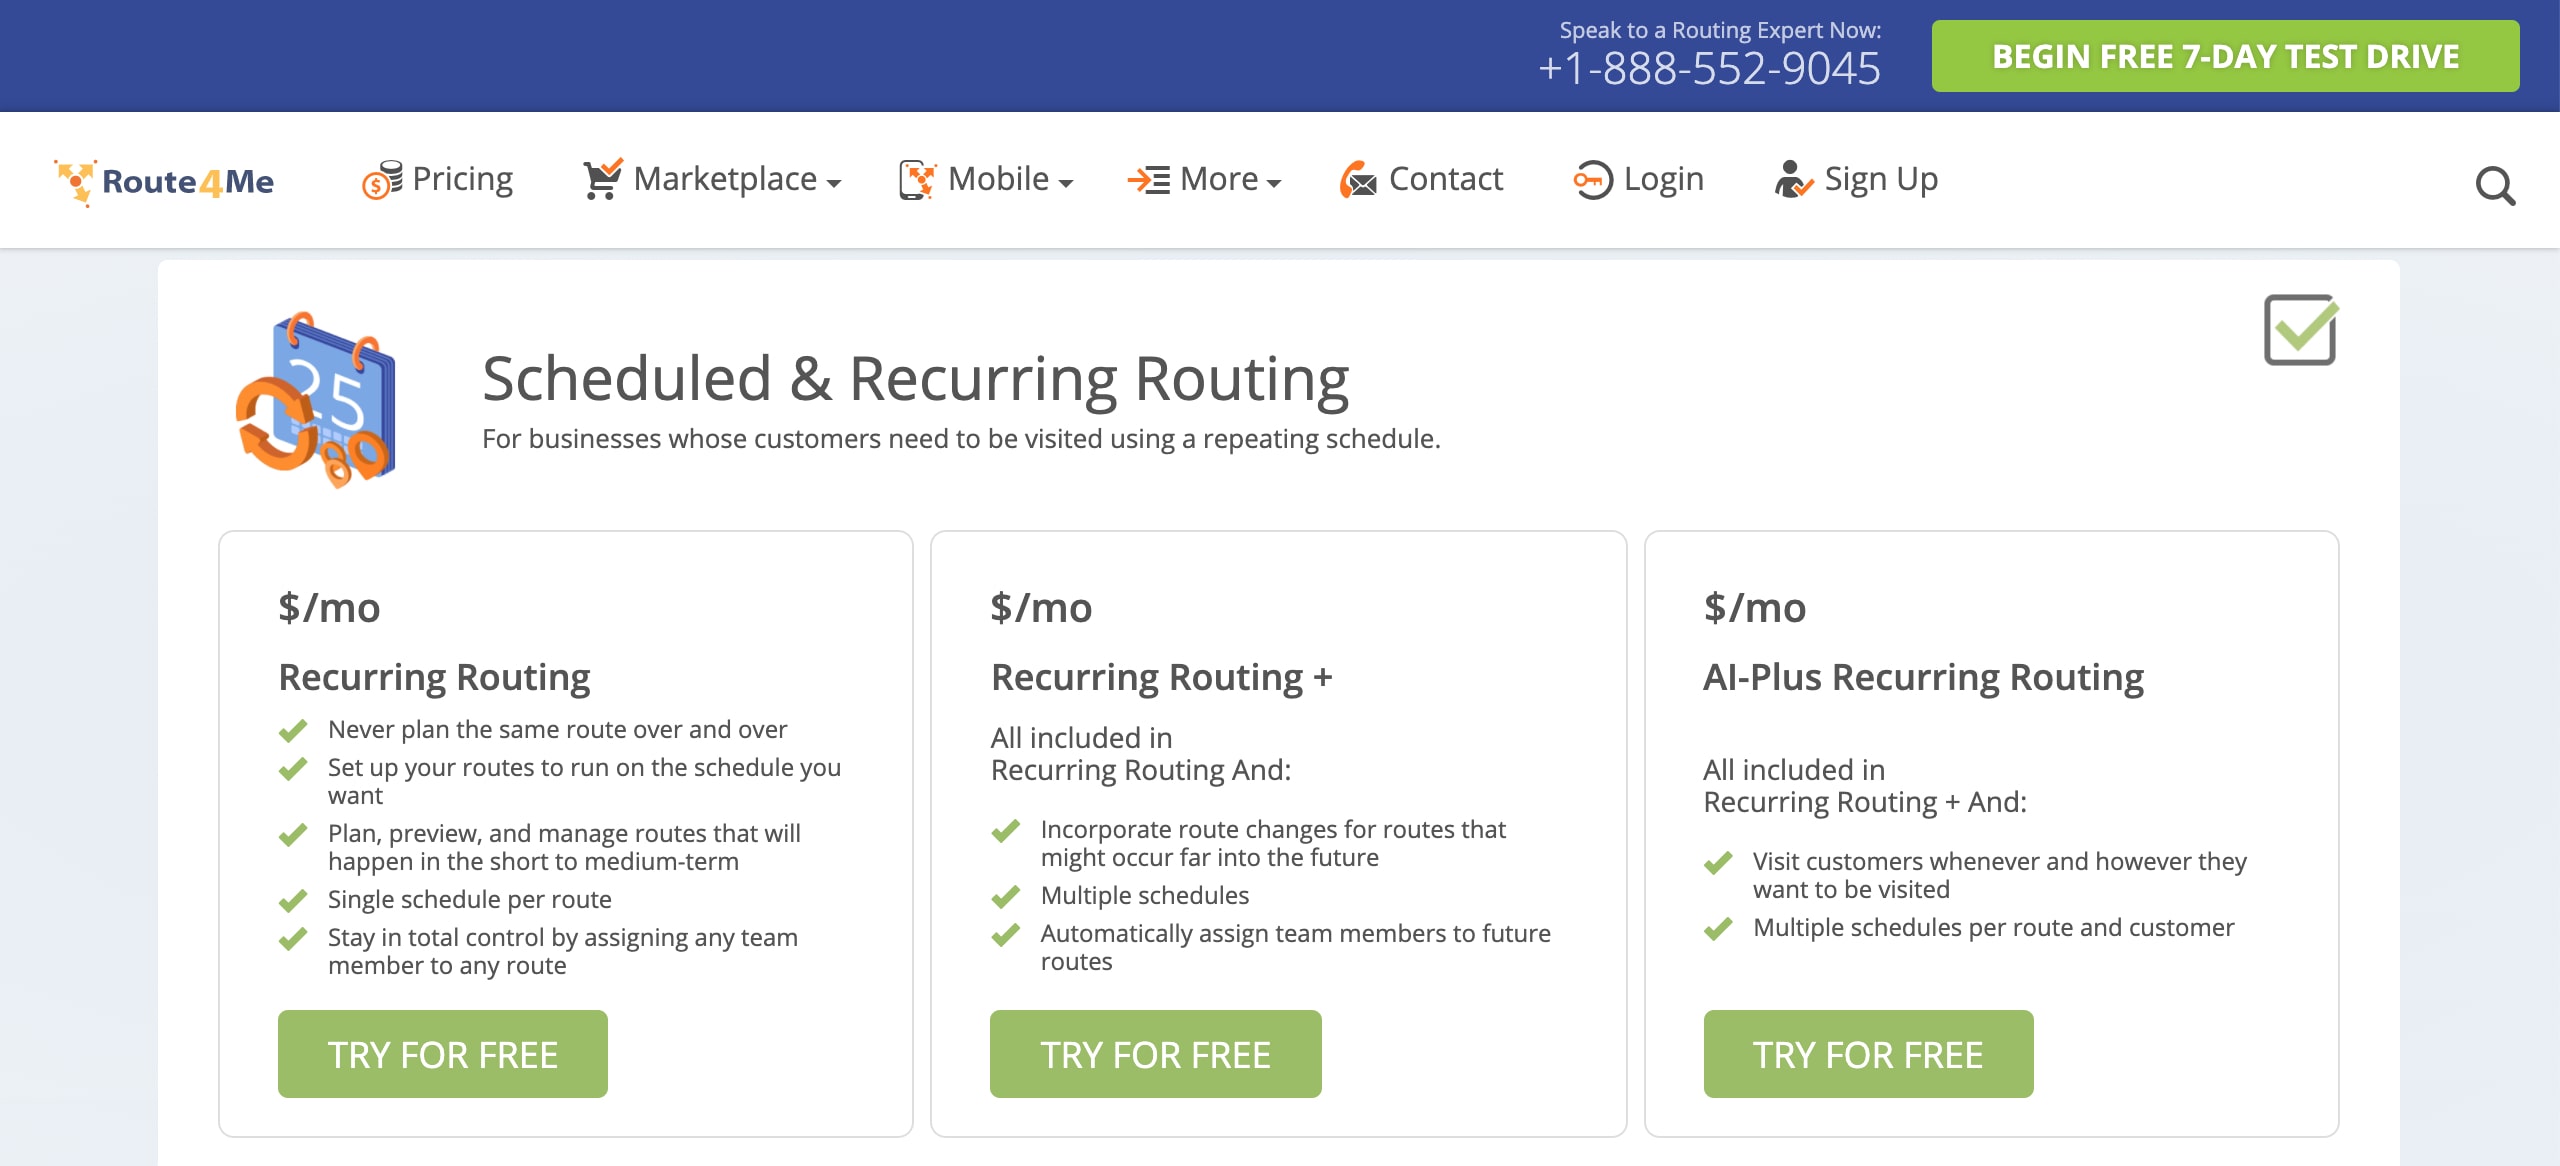 Get Recurring Route Scheduling software free trial and optimize recurring routing operations.